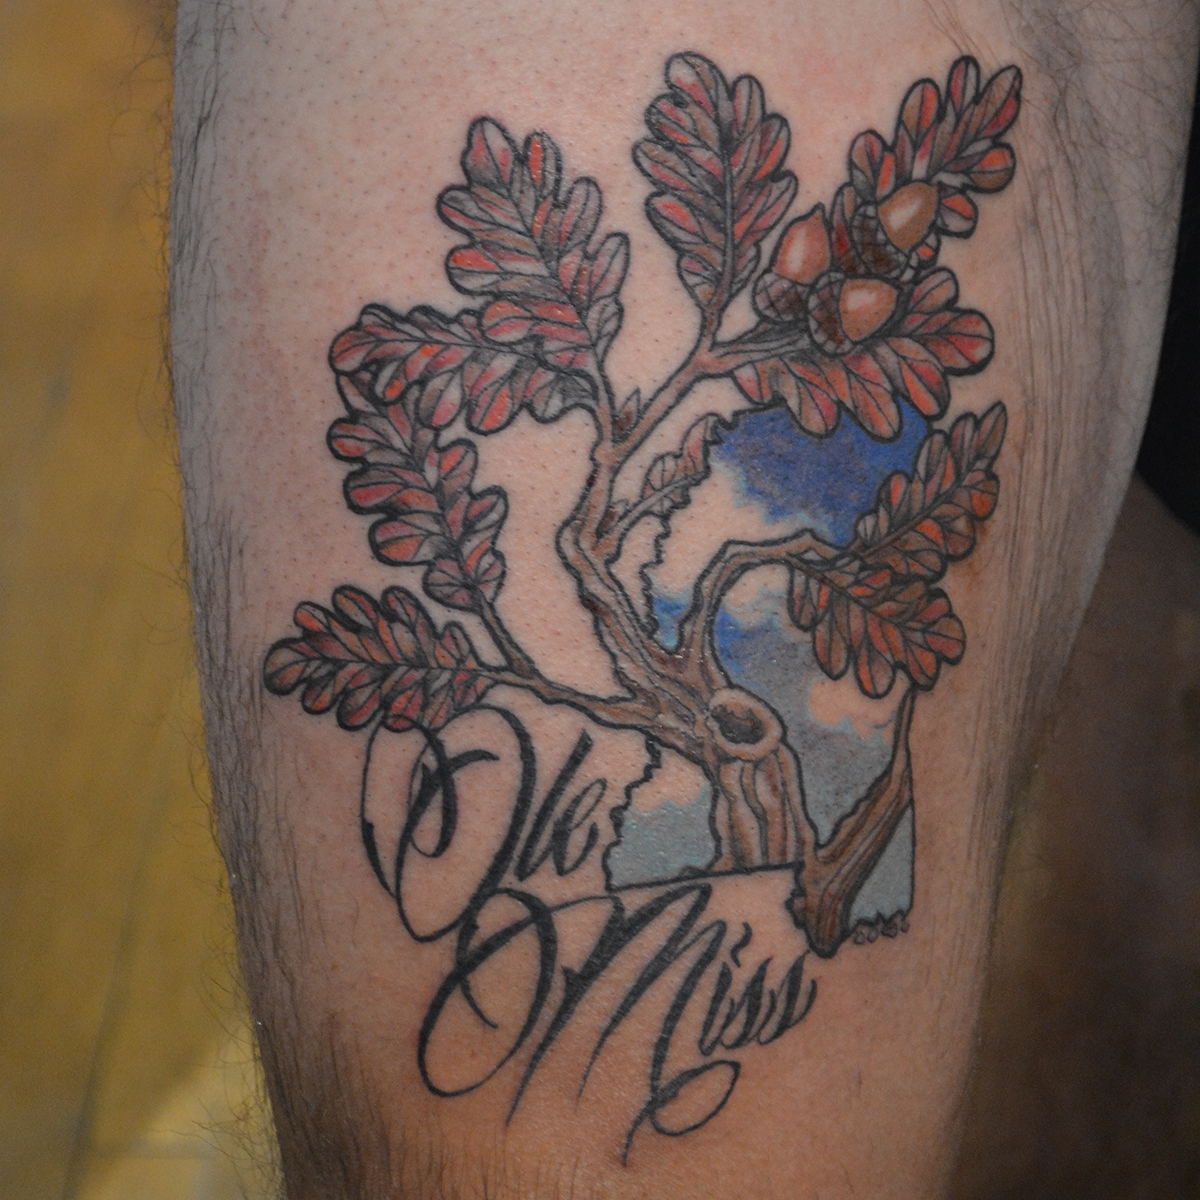 Leafless tree tattoo placed on the inner forearm.